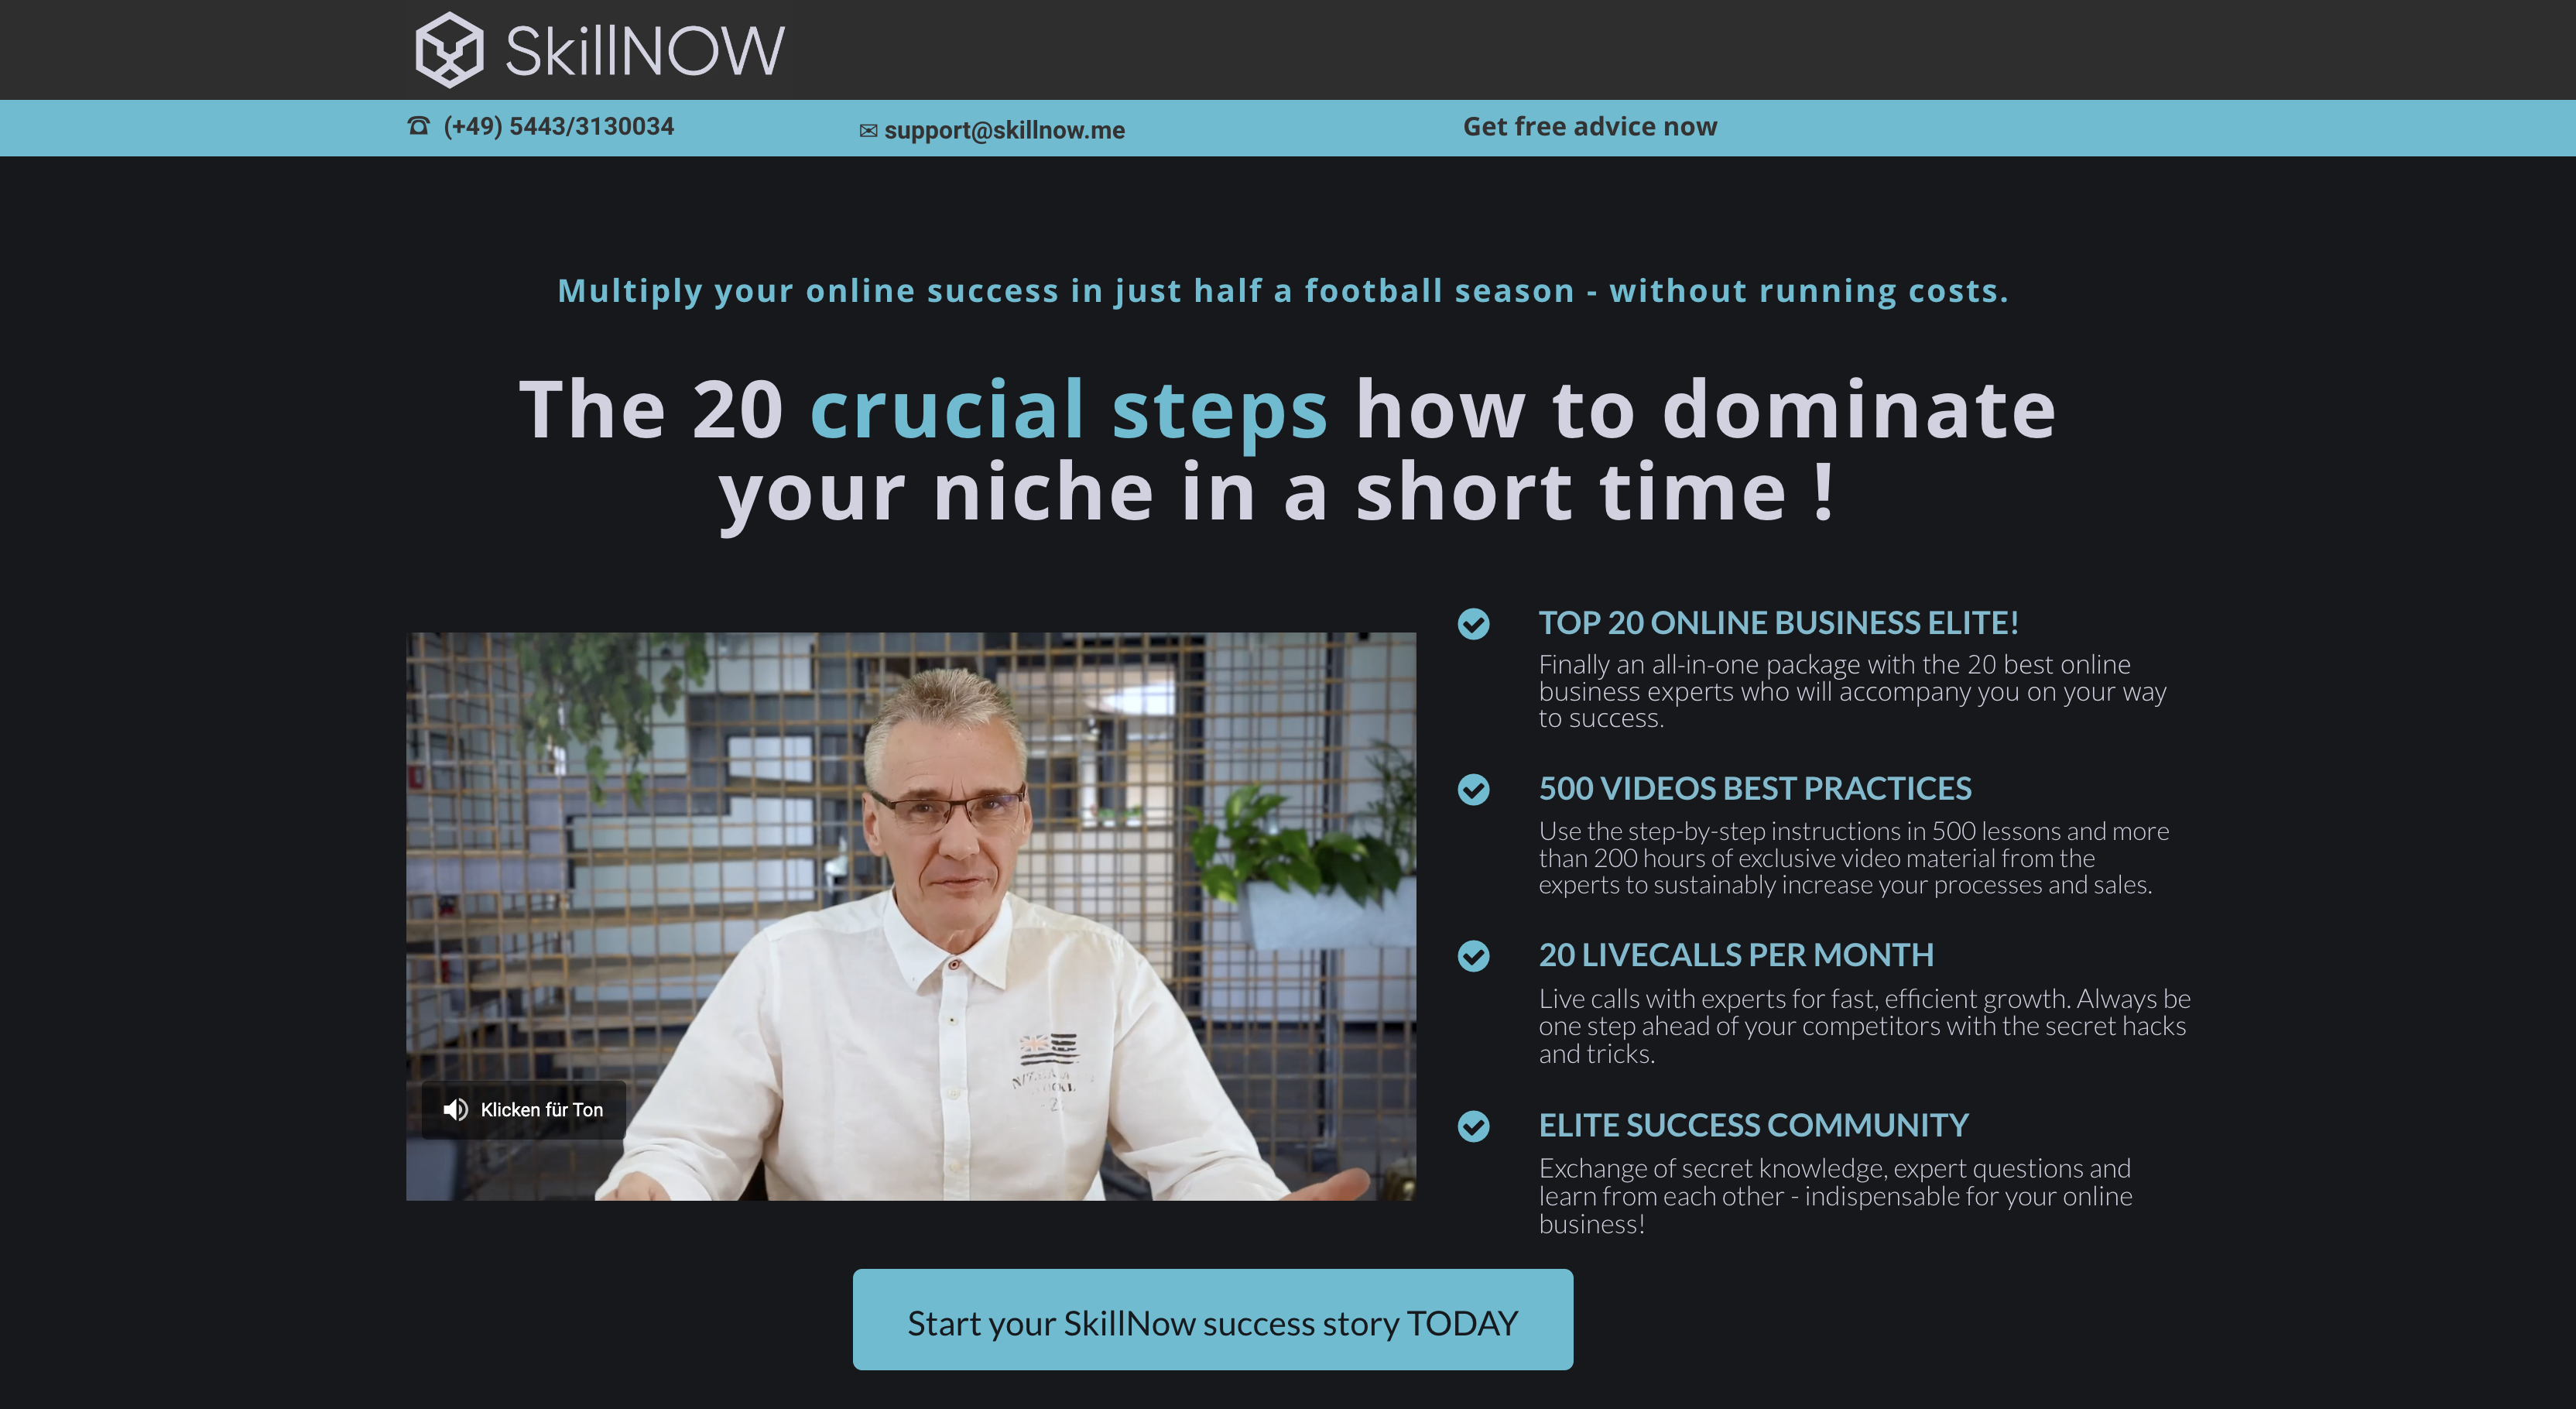 SkillNow Online Business Mastermind Experiences